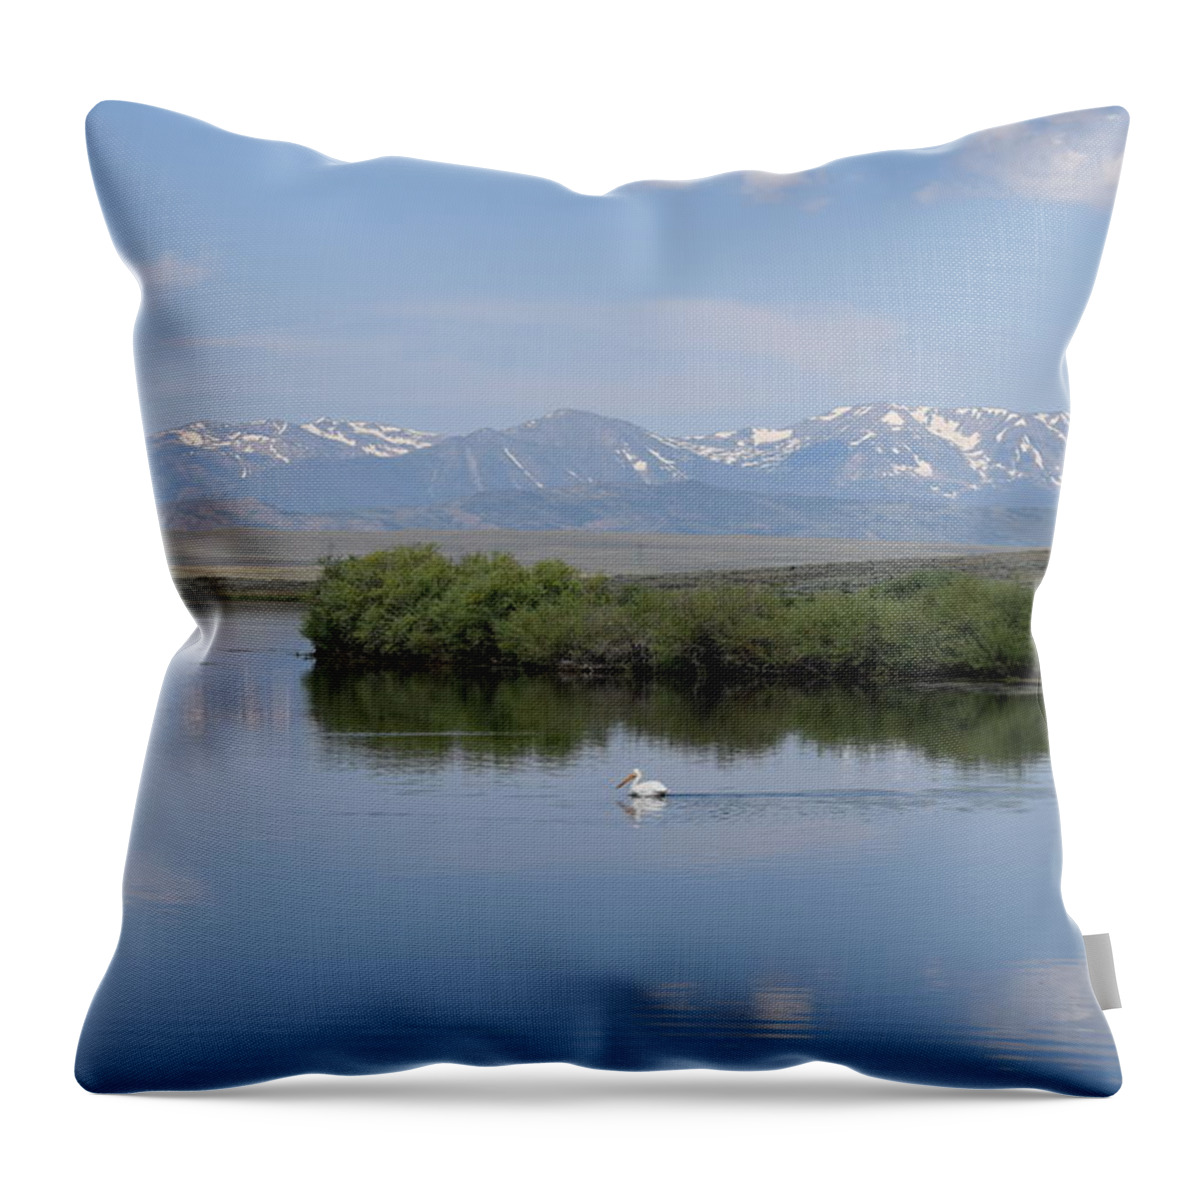 Animal Throw Pillow featuring the photograph Pelicans Walden Res Walden CO by Margarethe Binkley